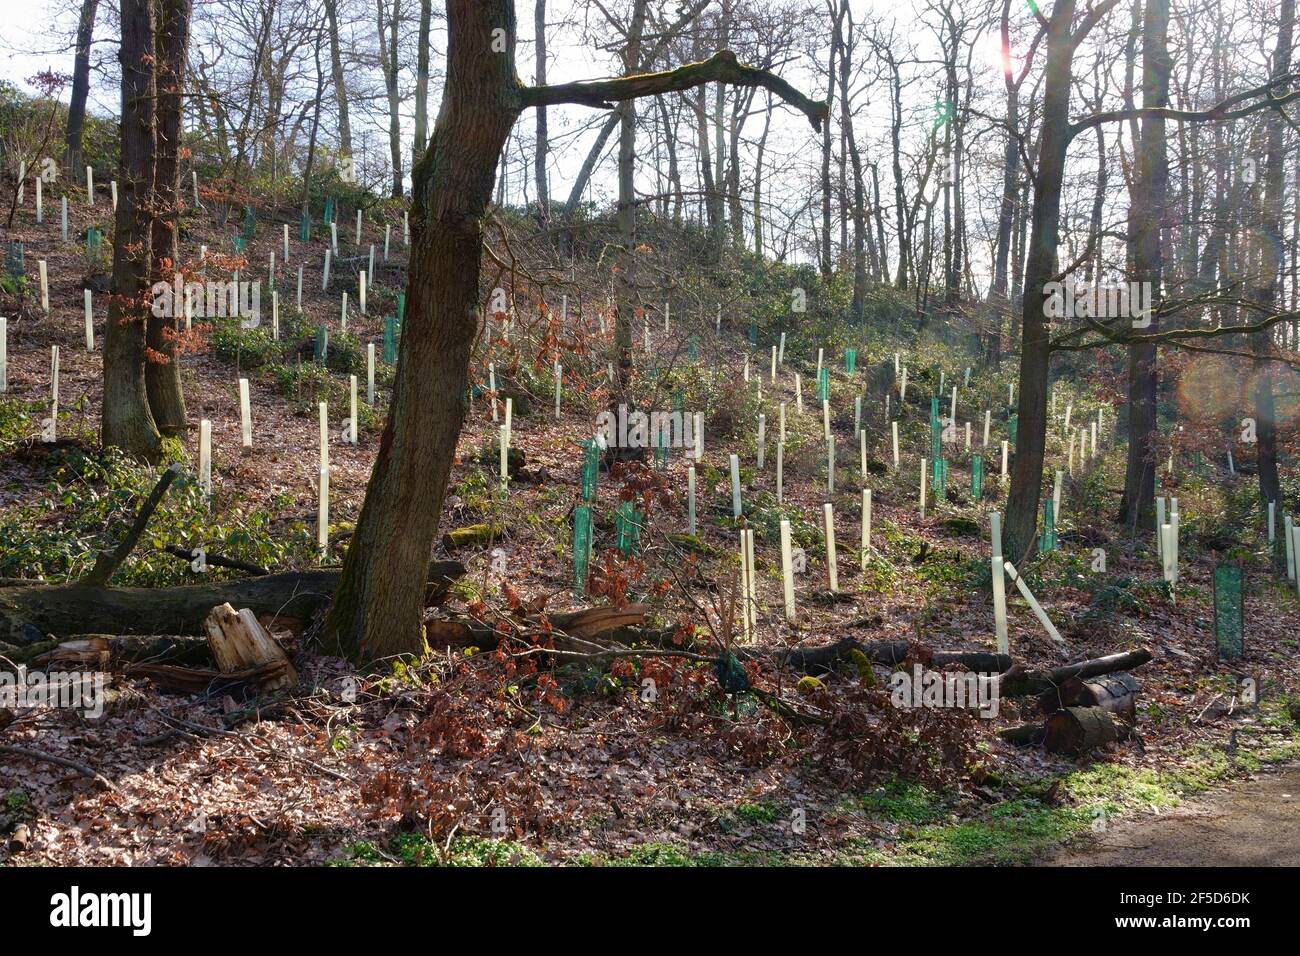 new planting in a clearing in the forest, self-decomposing growth tubes are to promote growth, Germany Stock Photo